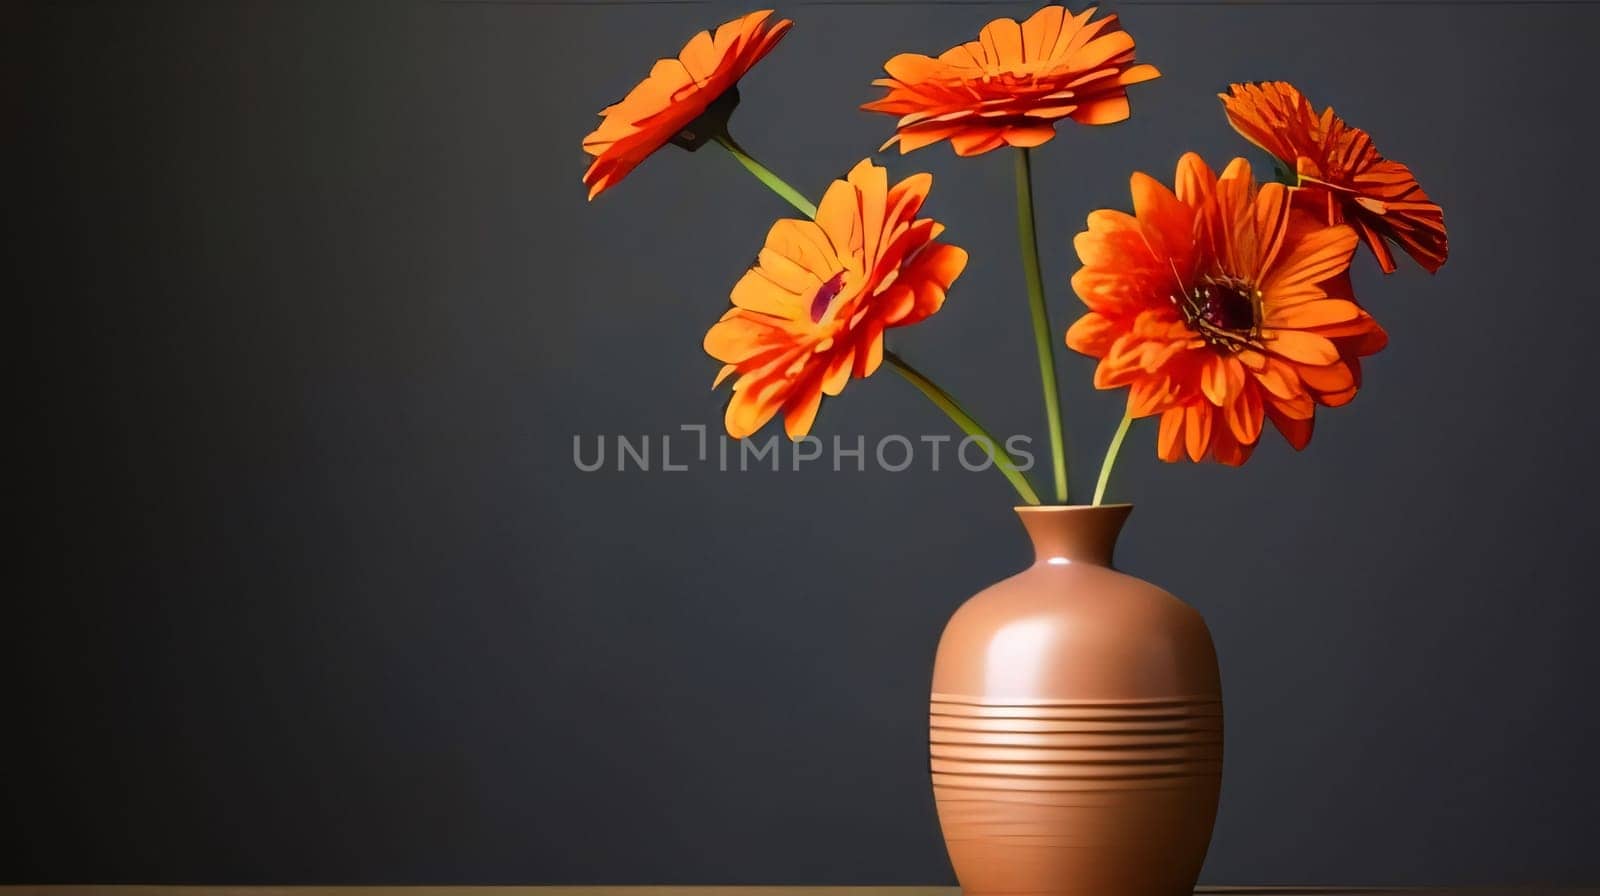 Orange flowers in a brown vase on a dark background, banner with space for your own content. Flowering flowers, a symbol of spring, new life. A joyful time of nature waking up to life.